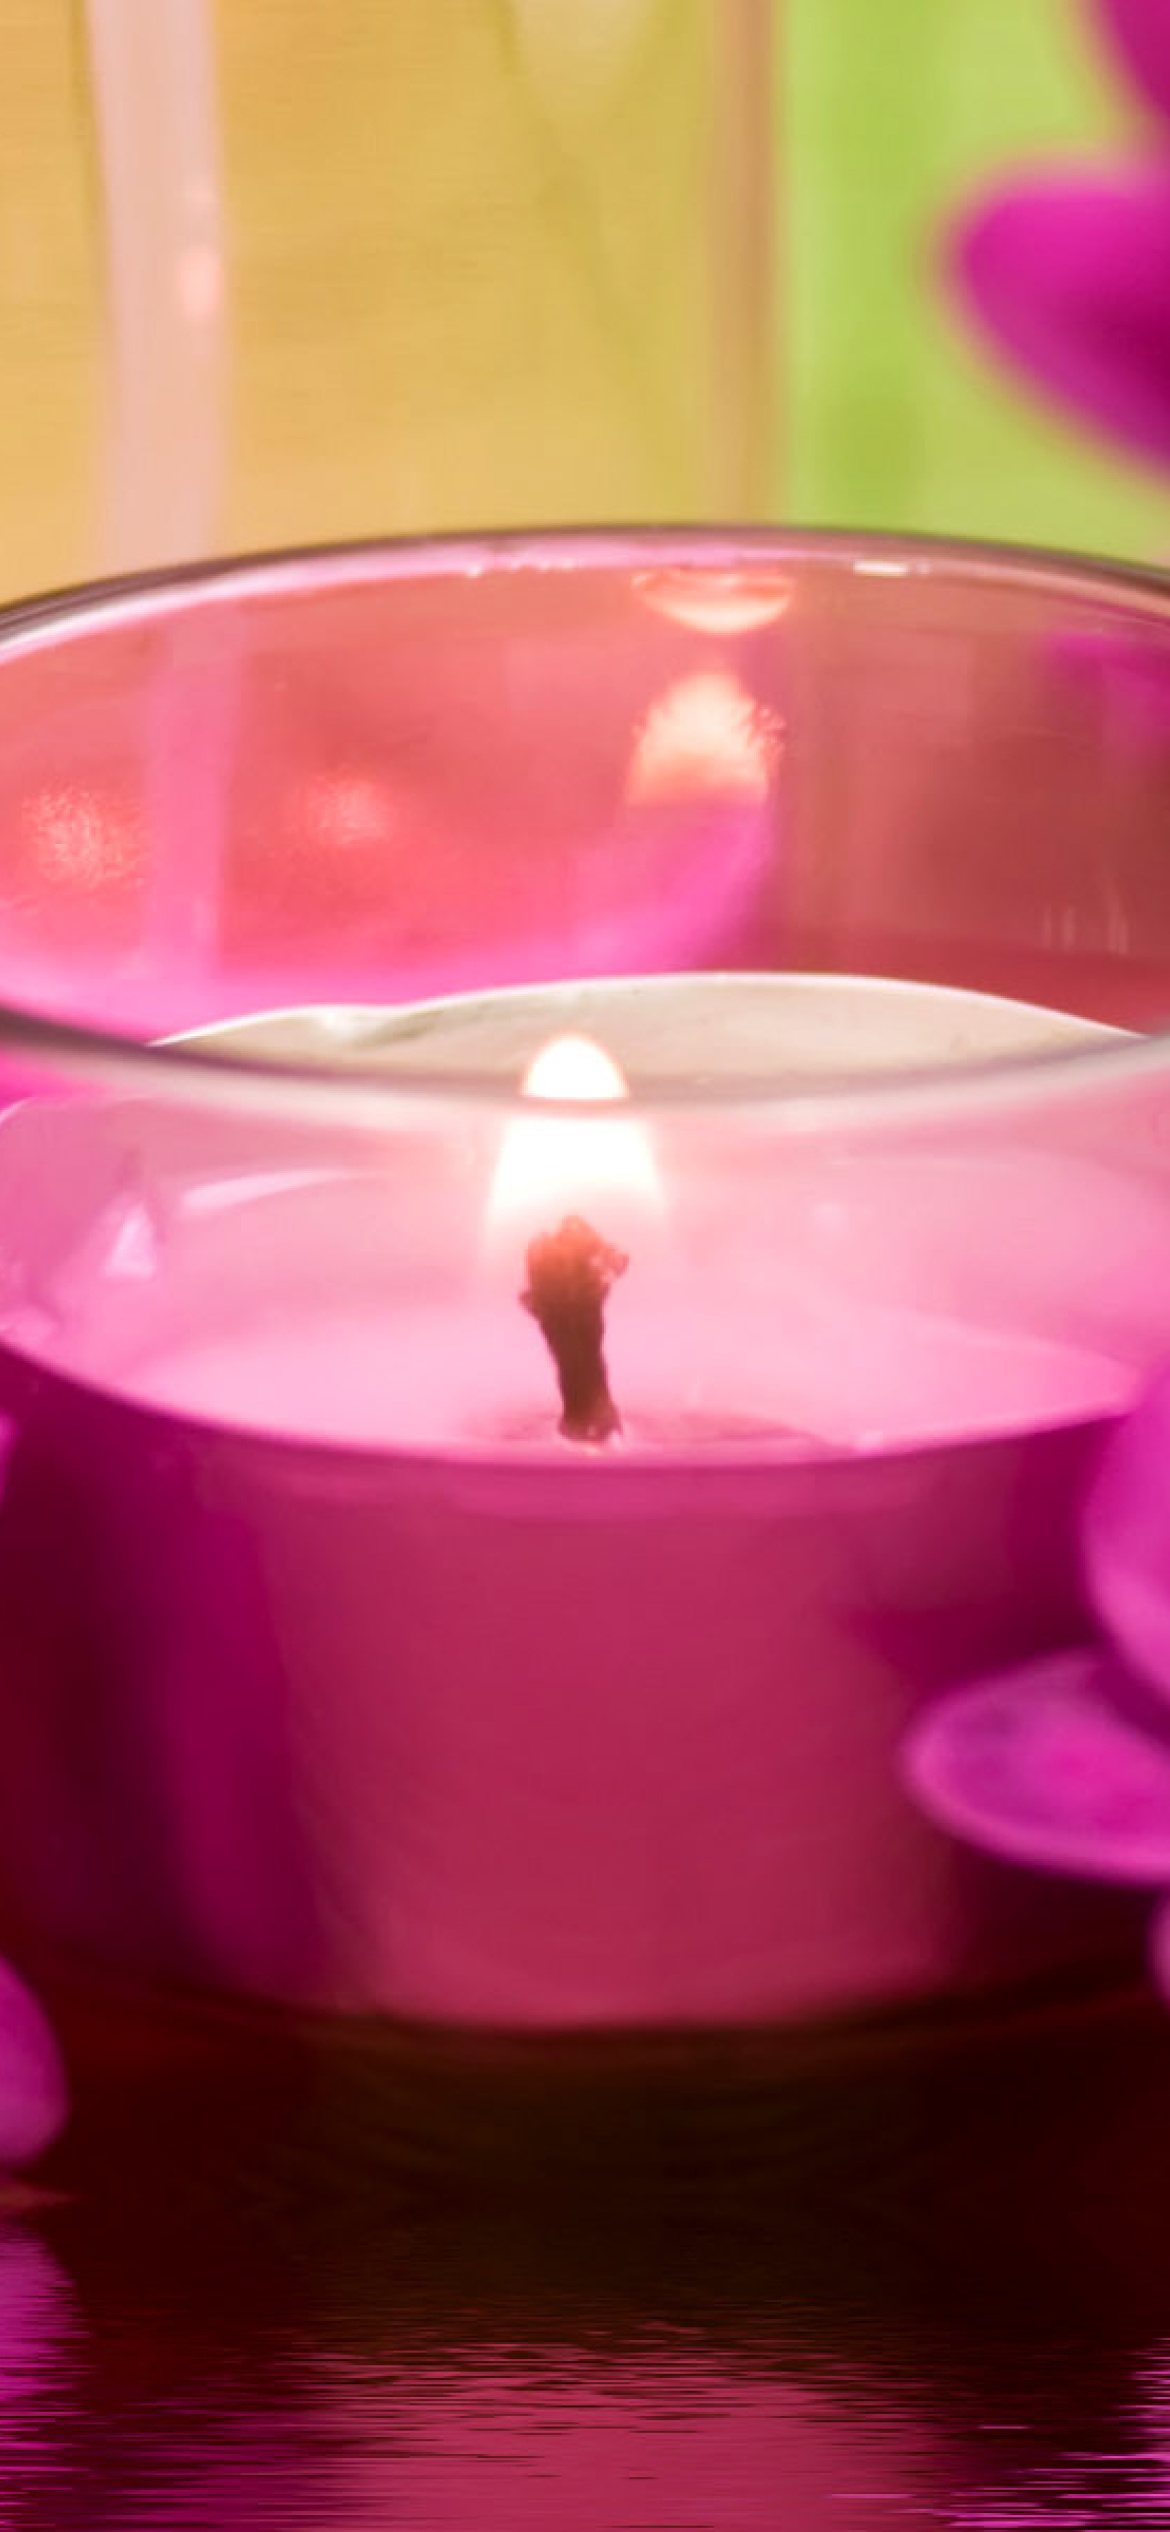 Violet Candle and Flowers screenshot #1 1170x2532